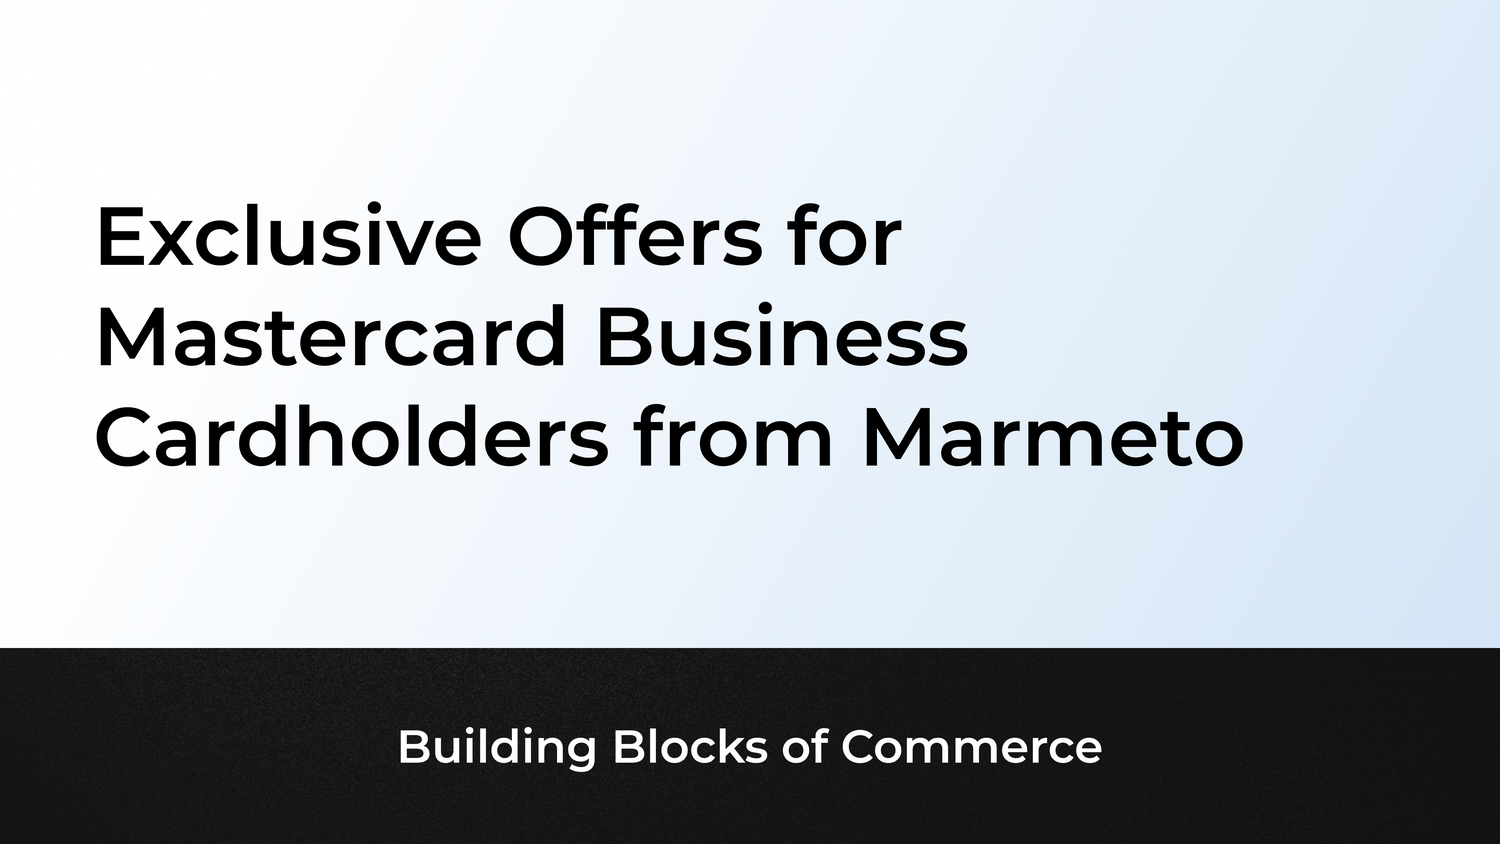 Exclusive Offers for Mastercard Business Cardholders from Marmeto